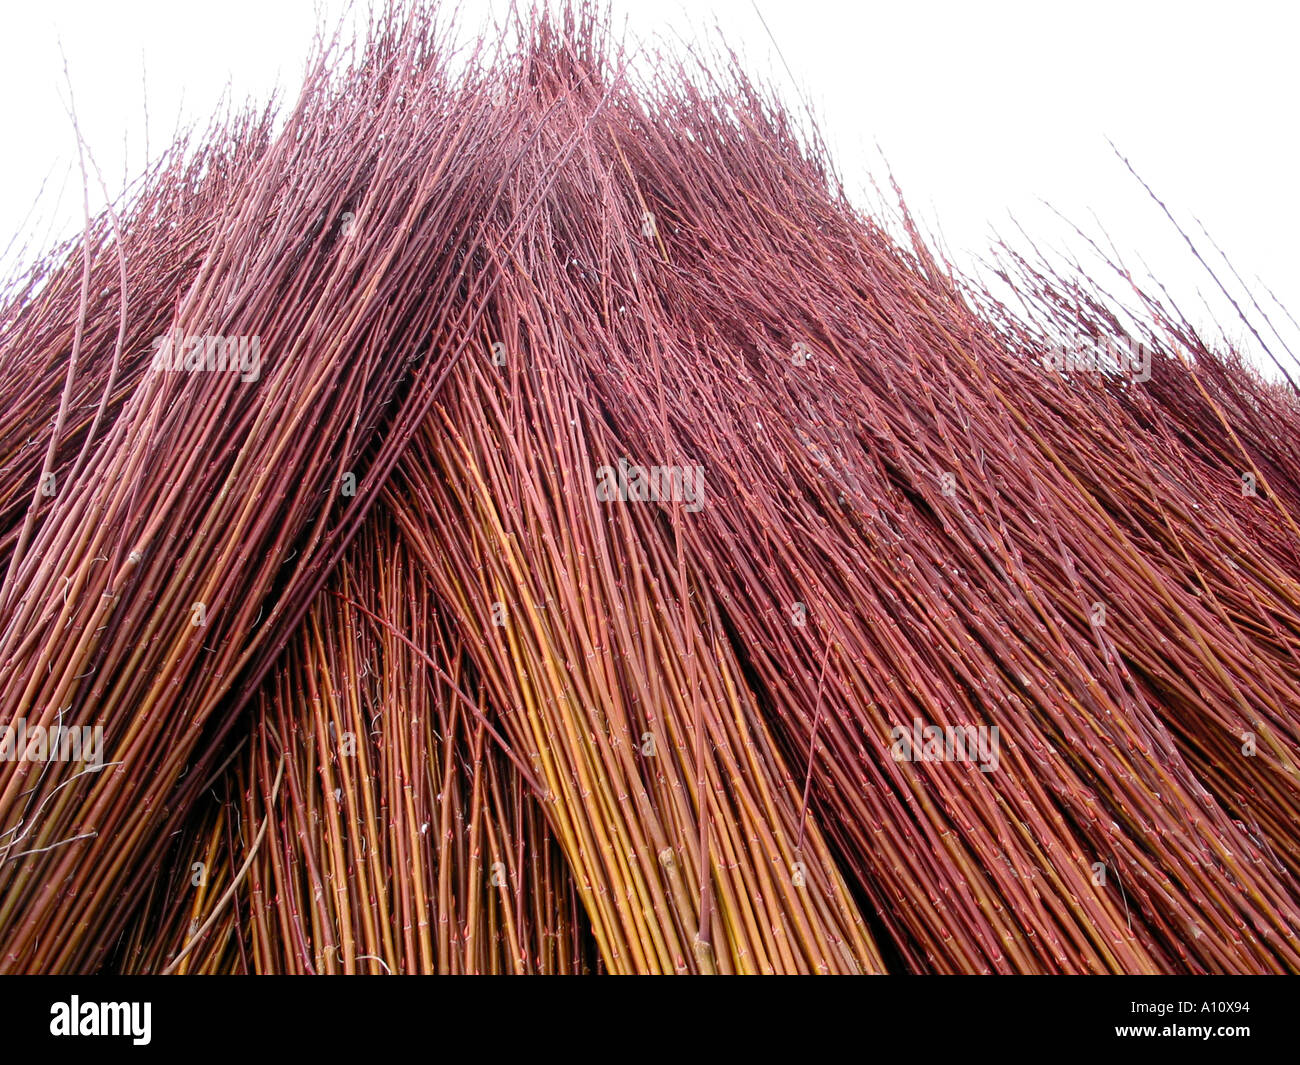 sheafs of reed Stock Photo